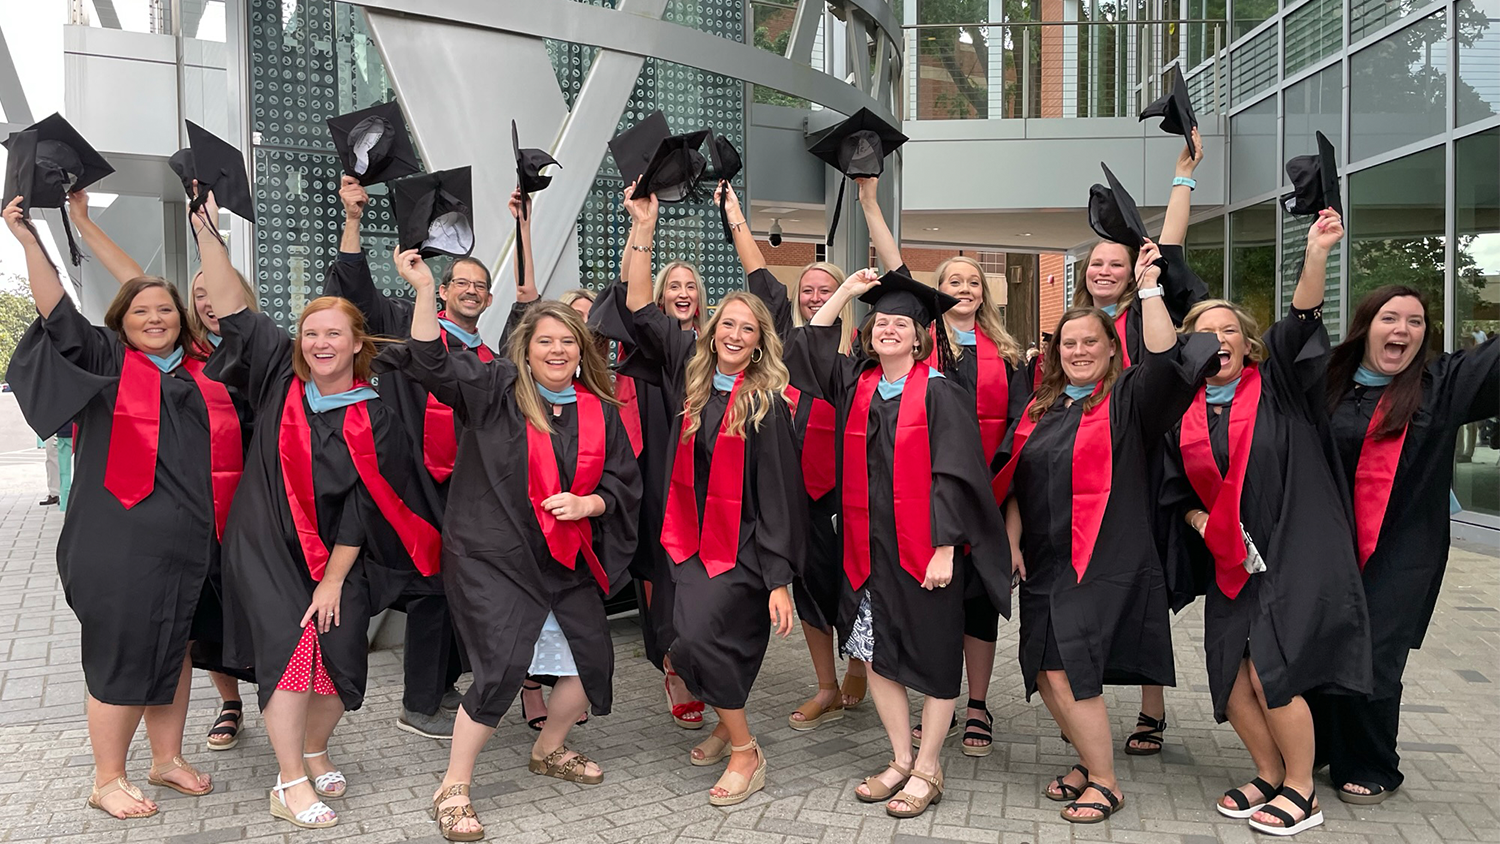 Eighteen Yadkin County Schools teachers earned their master's degree from the NC State College of Education through the Yadkin Wolfpack Literacy Partnership